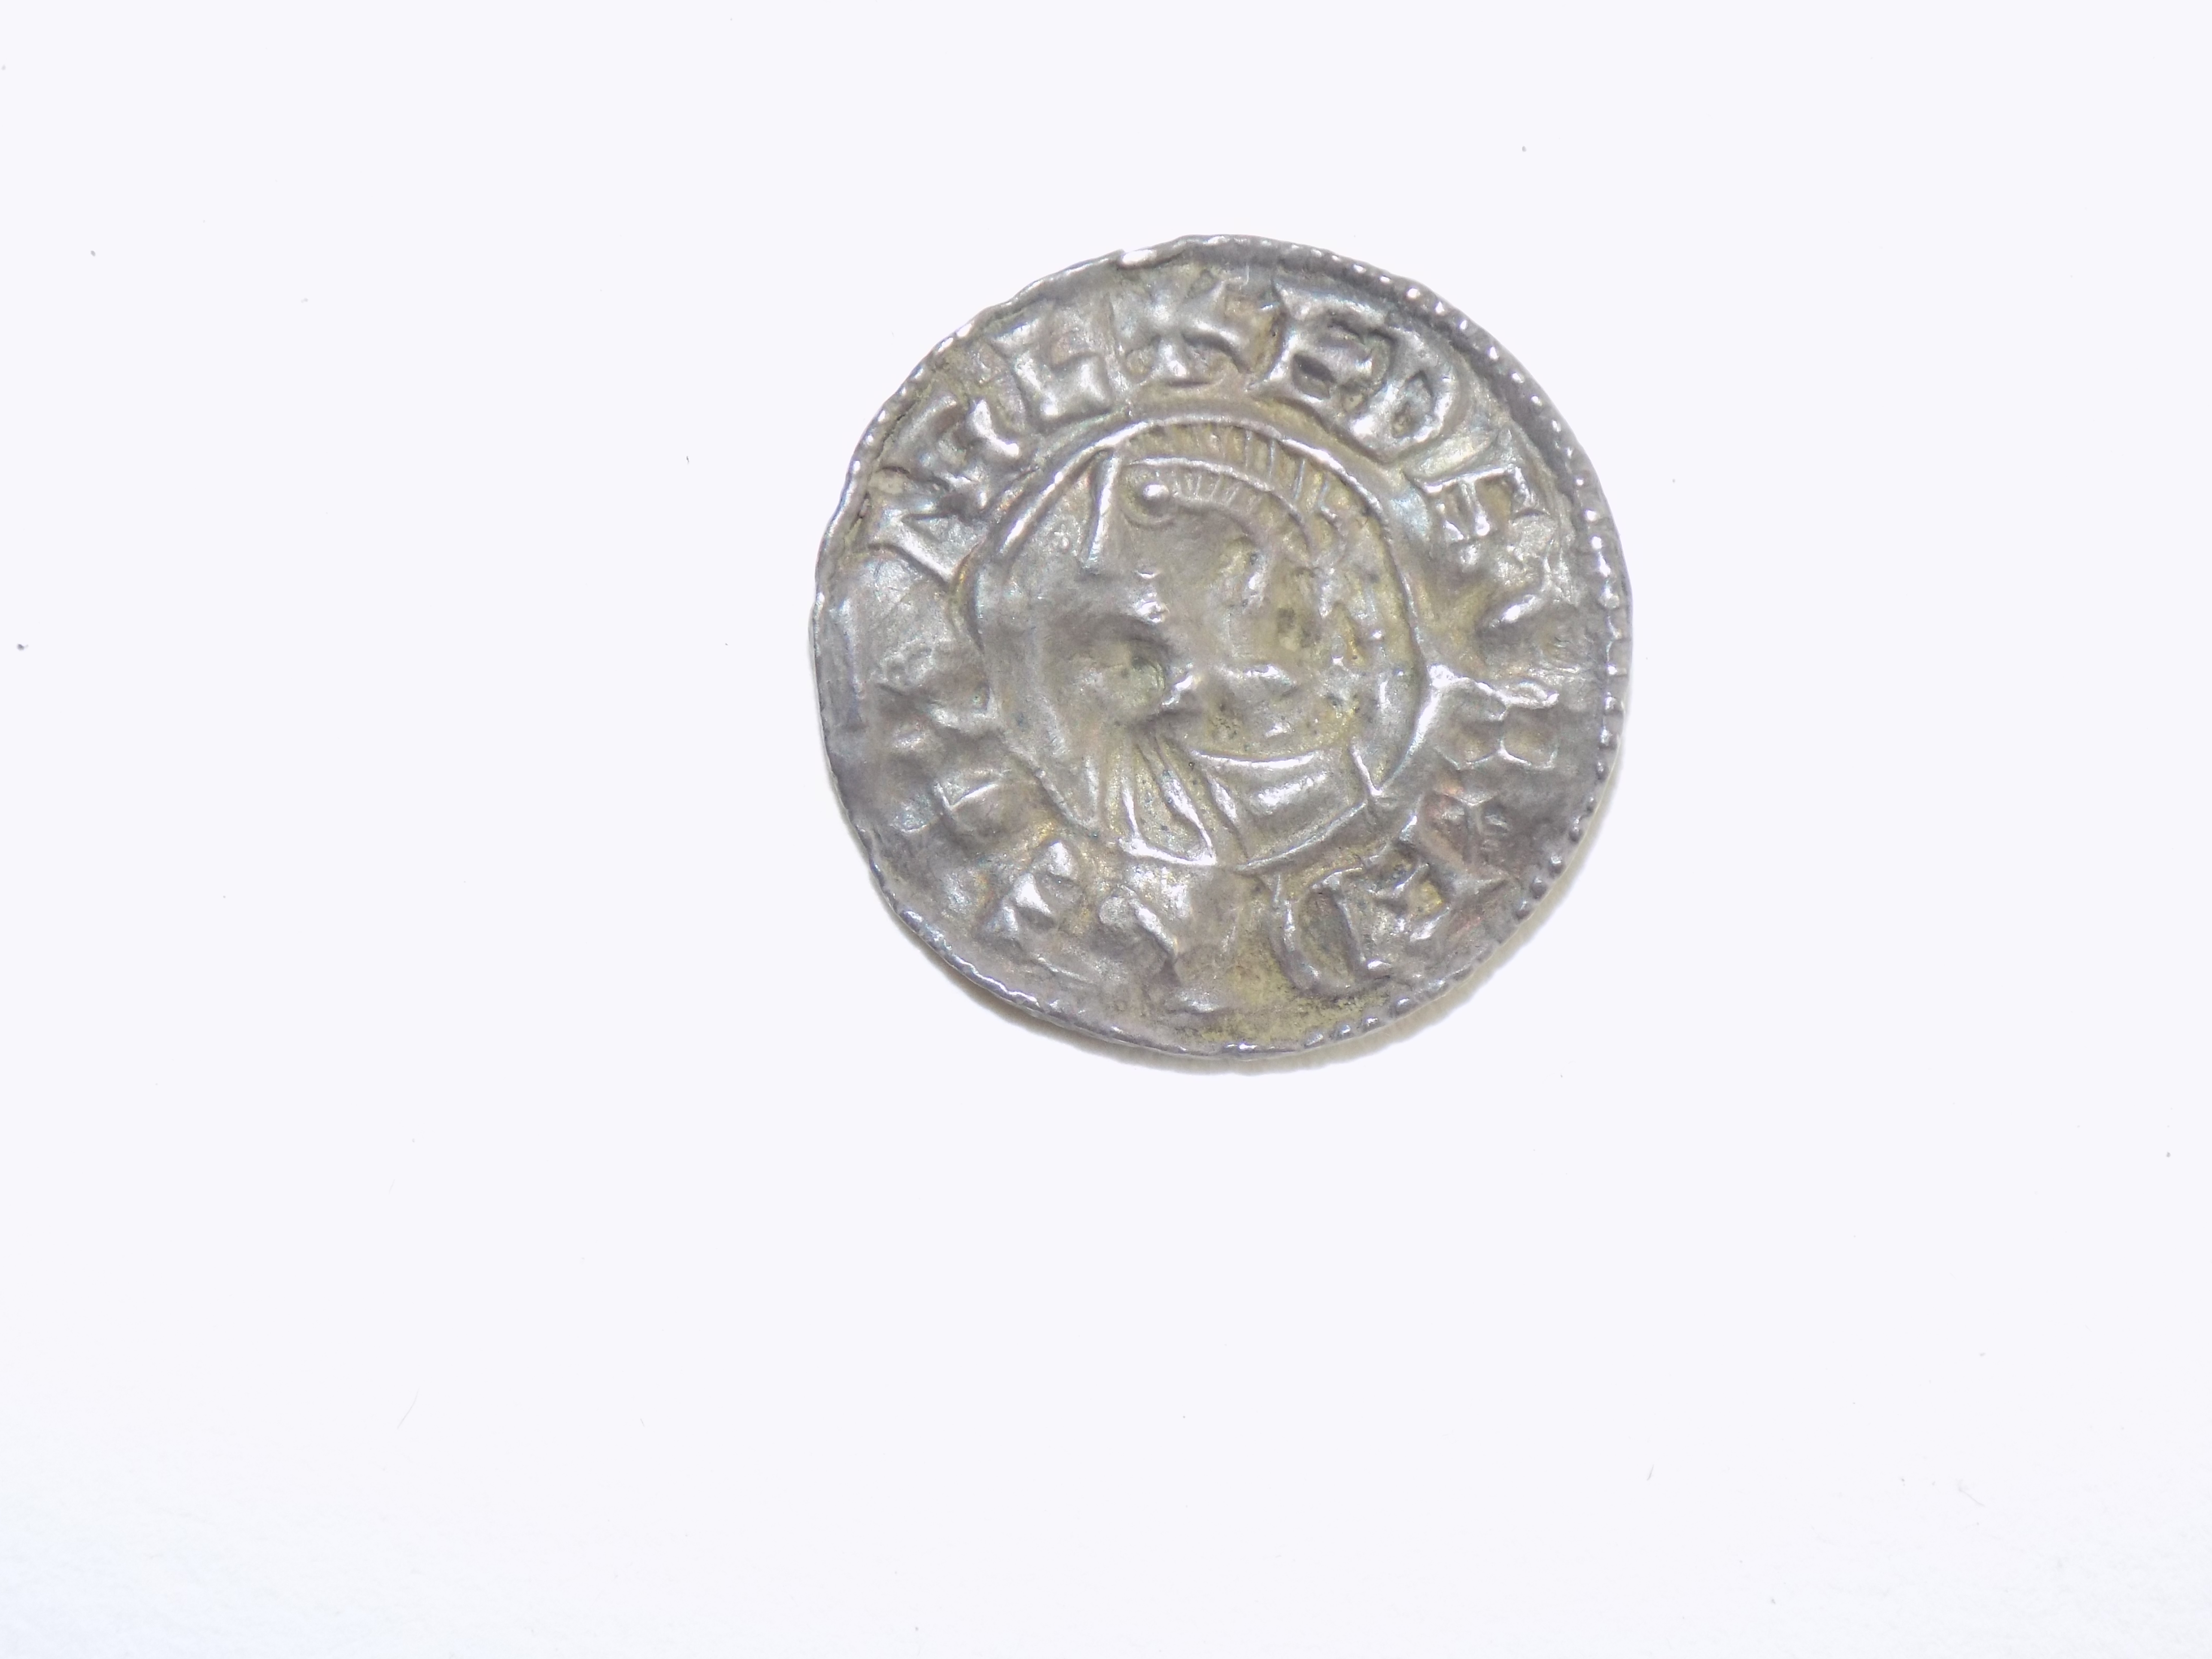 Aethelred II small cross type silver penny.